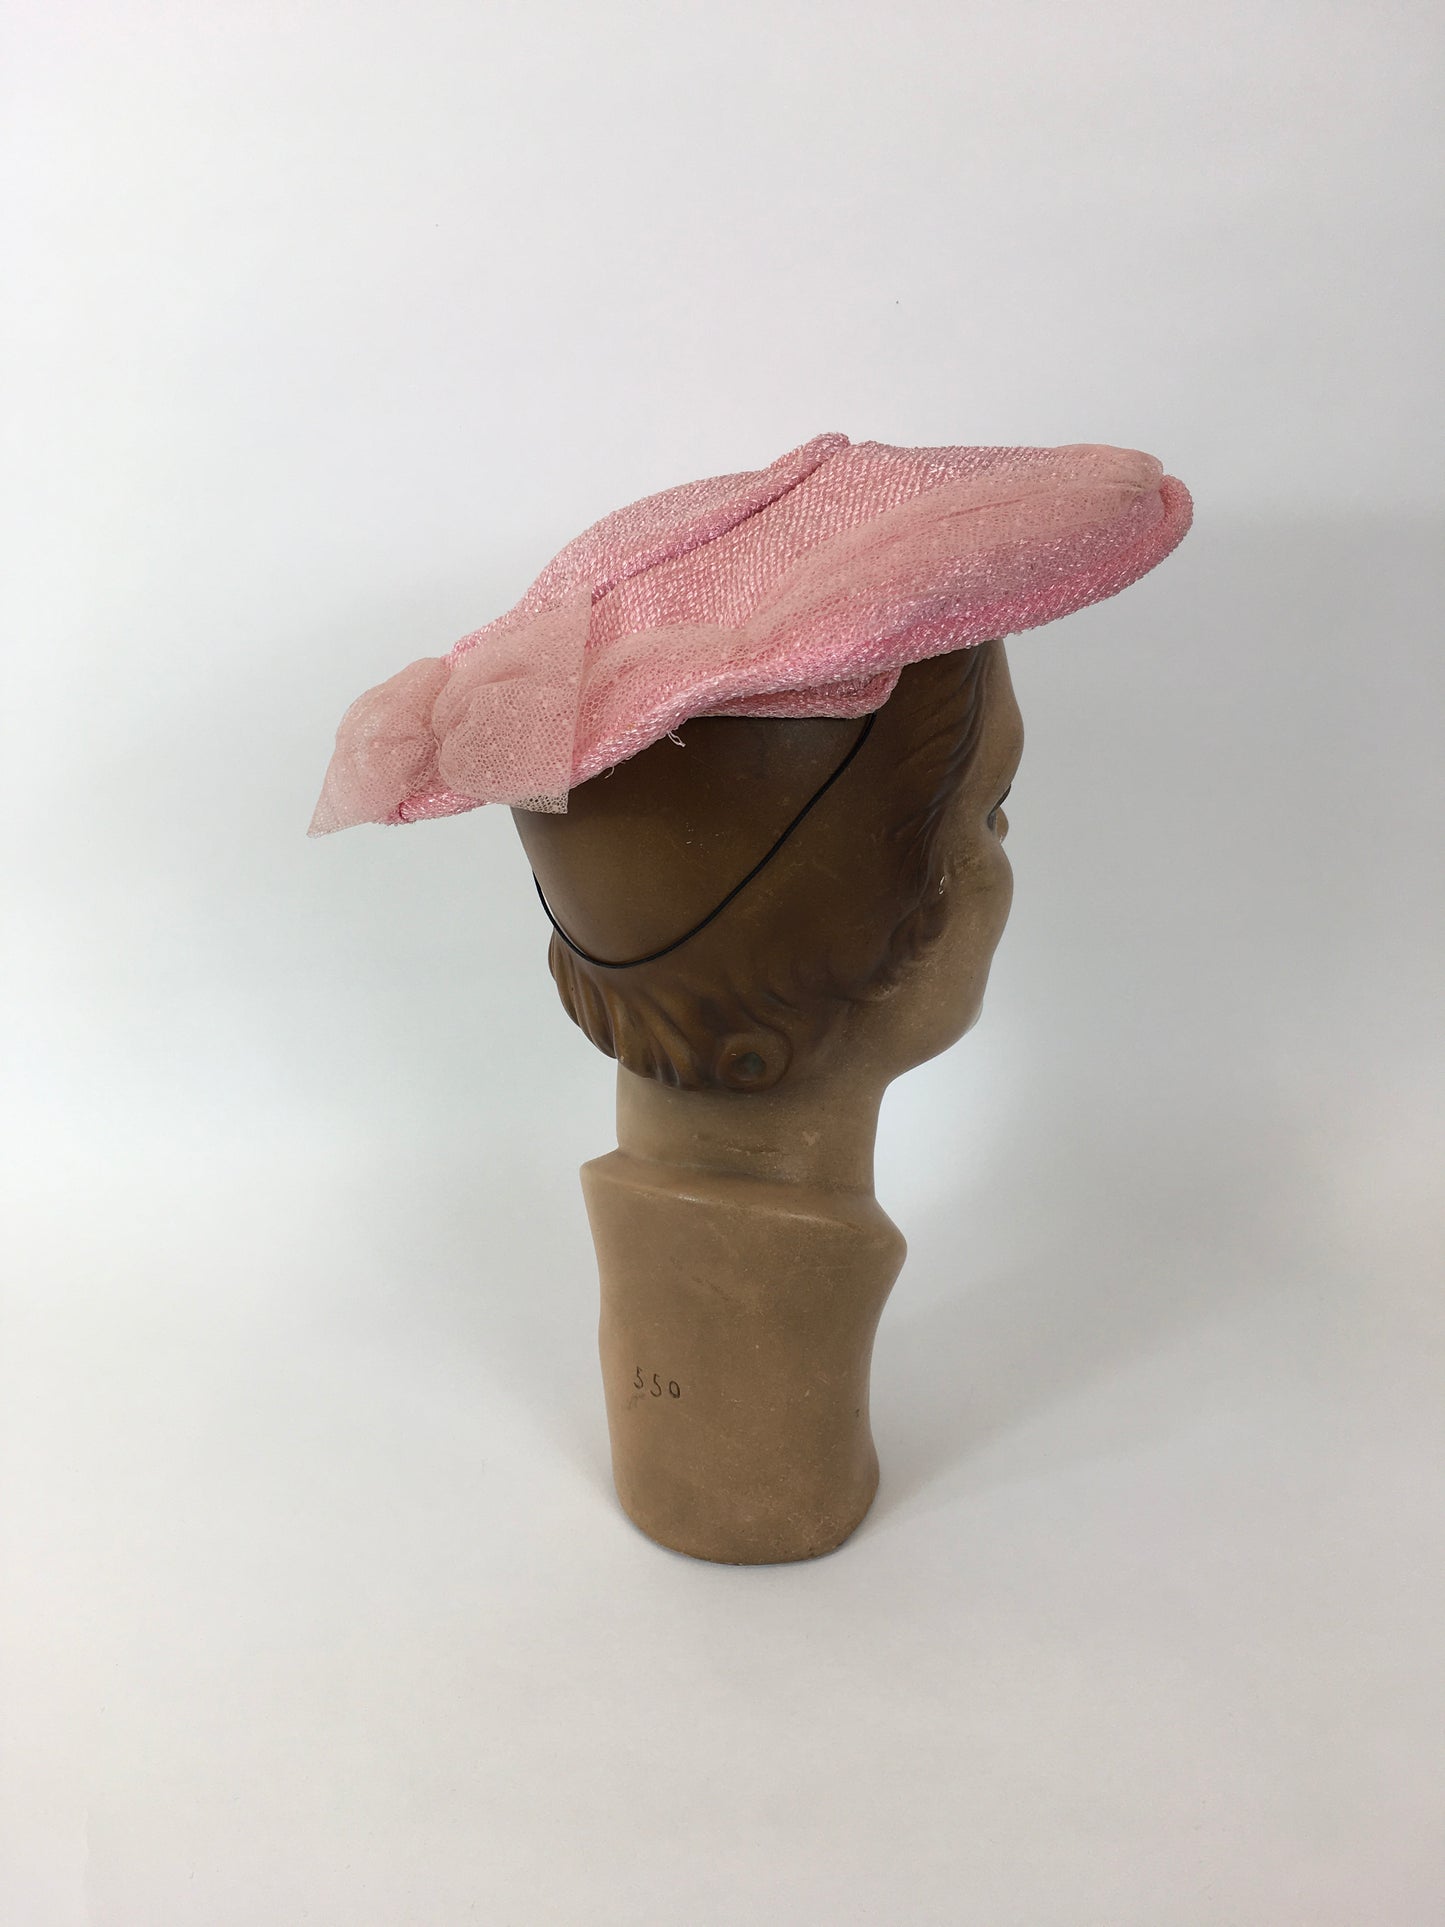 Original 1950’s Darling Powder Pink Platter Hat - With Attached Polka Dot Veiling and Bow